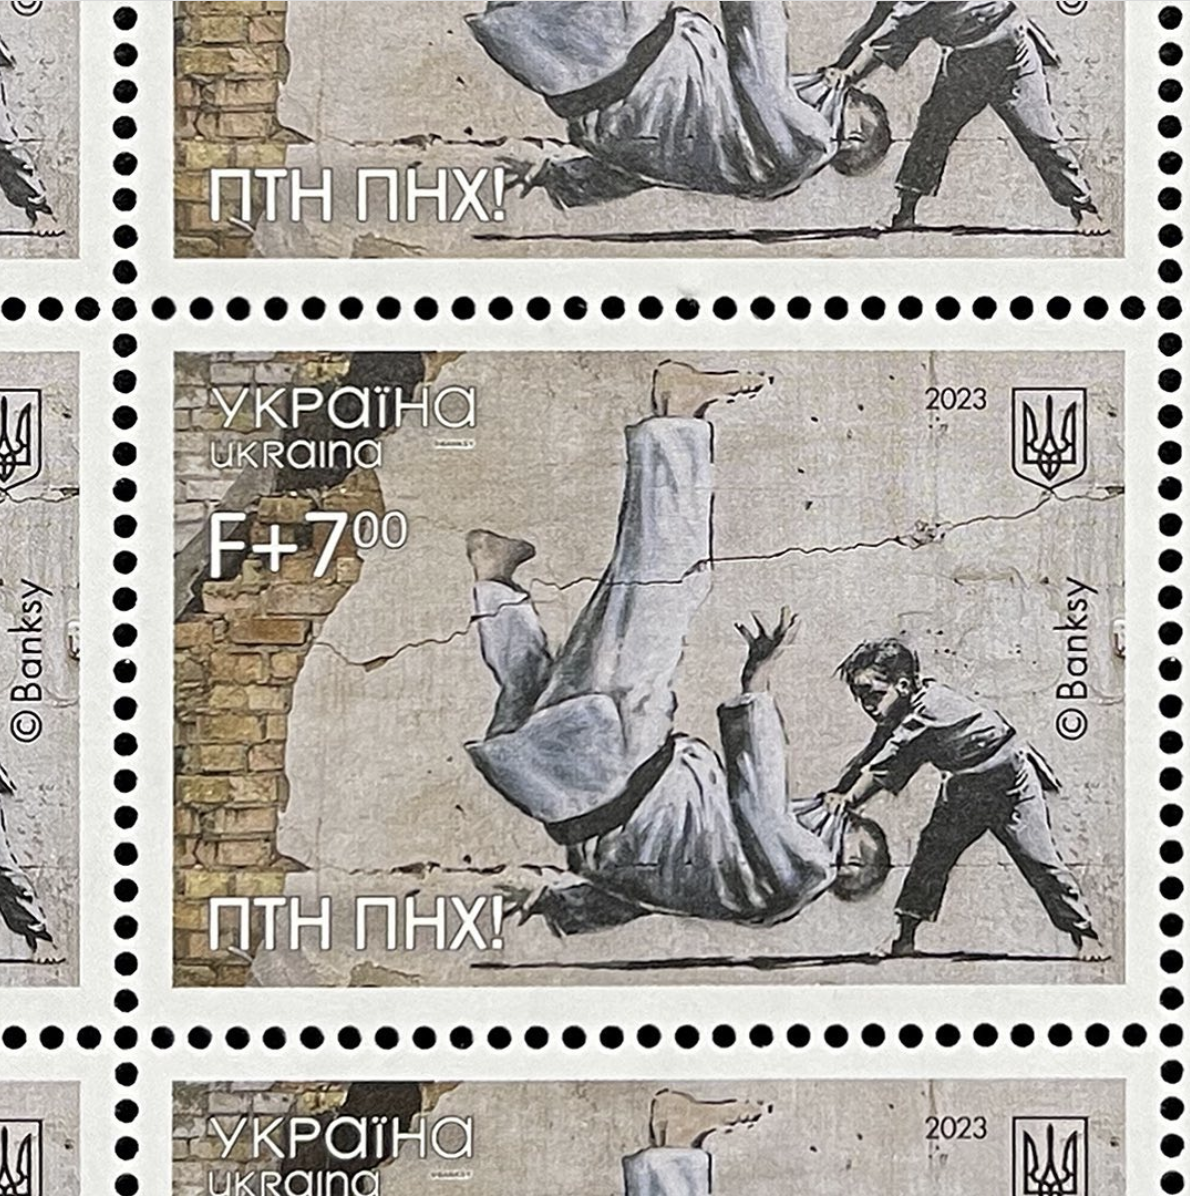 Ukraine Releases a Banksy Stamp That Features a Kid Judo Flipping an Older Man Resembling Vladimir Putin